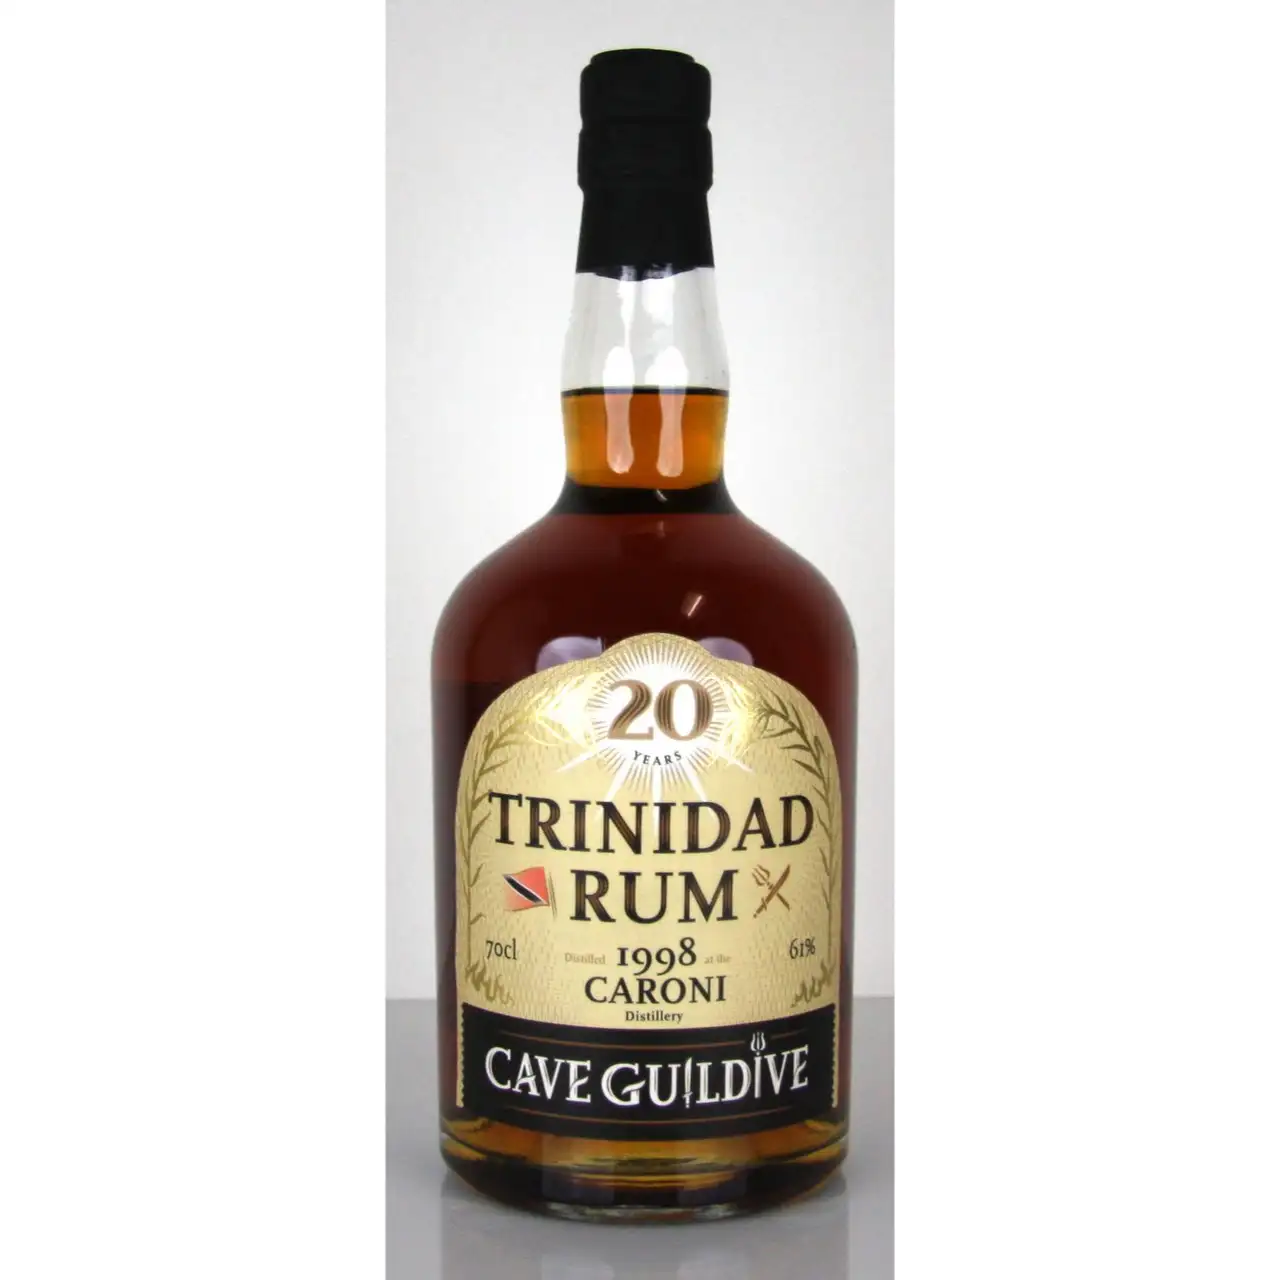 Image of the front of the bottle of the rum Trinidad Rum HTR